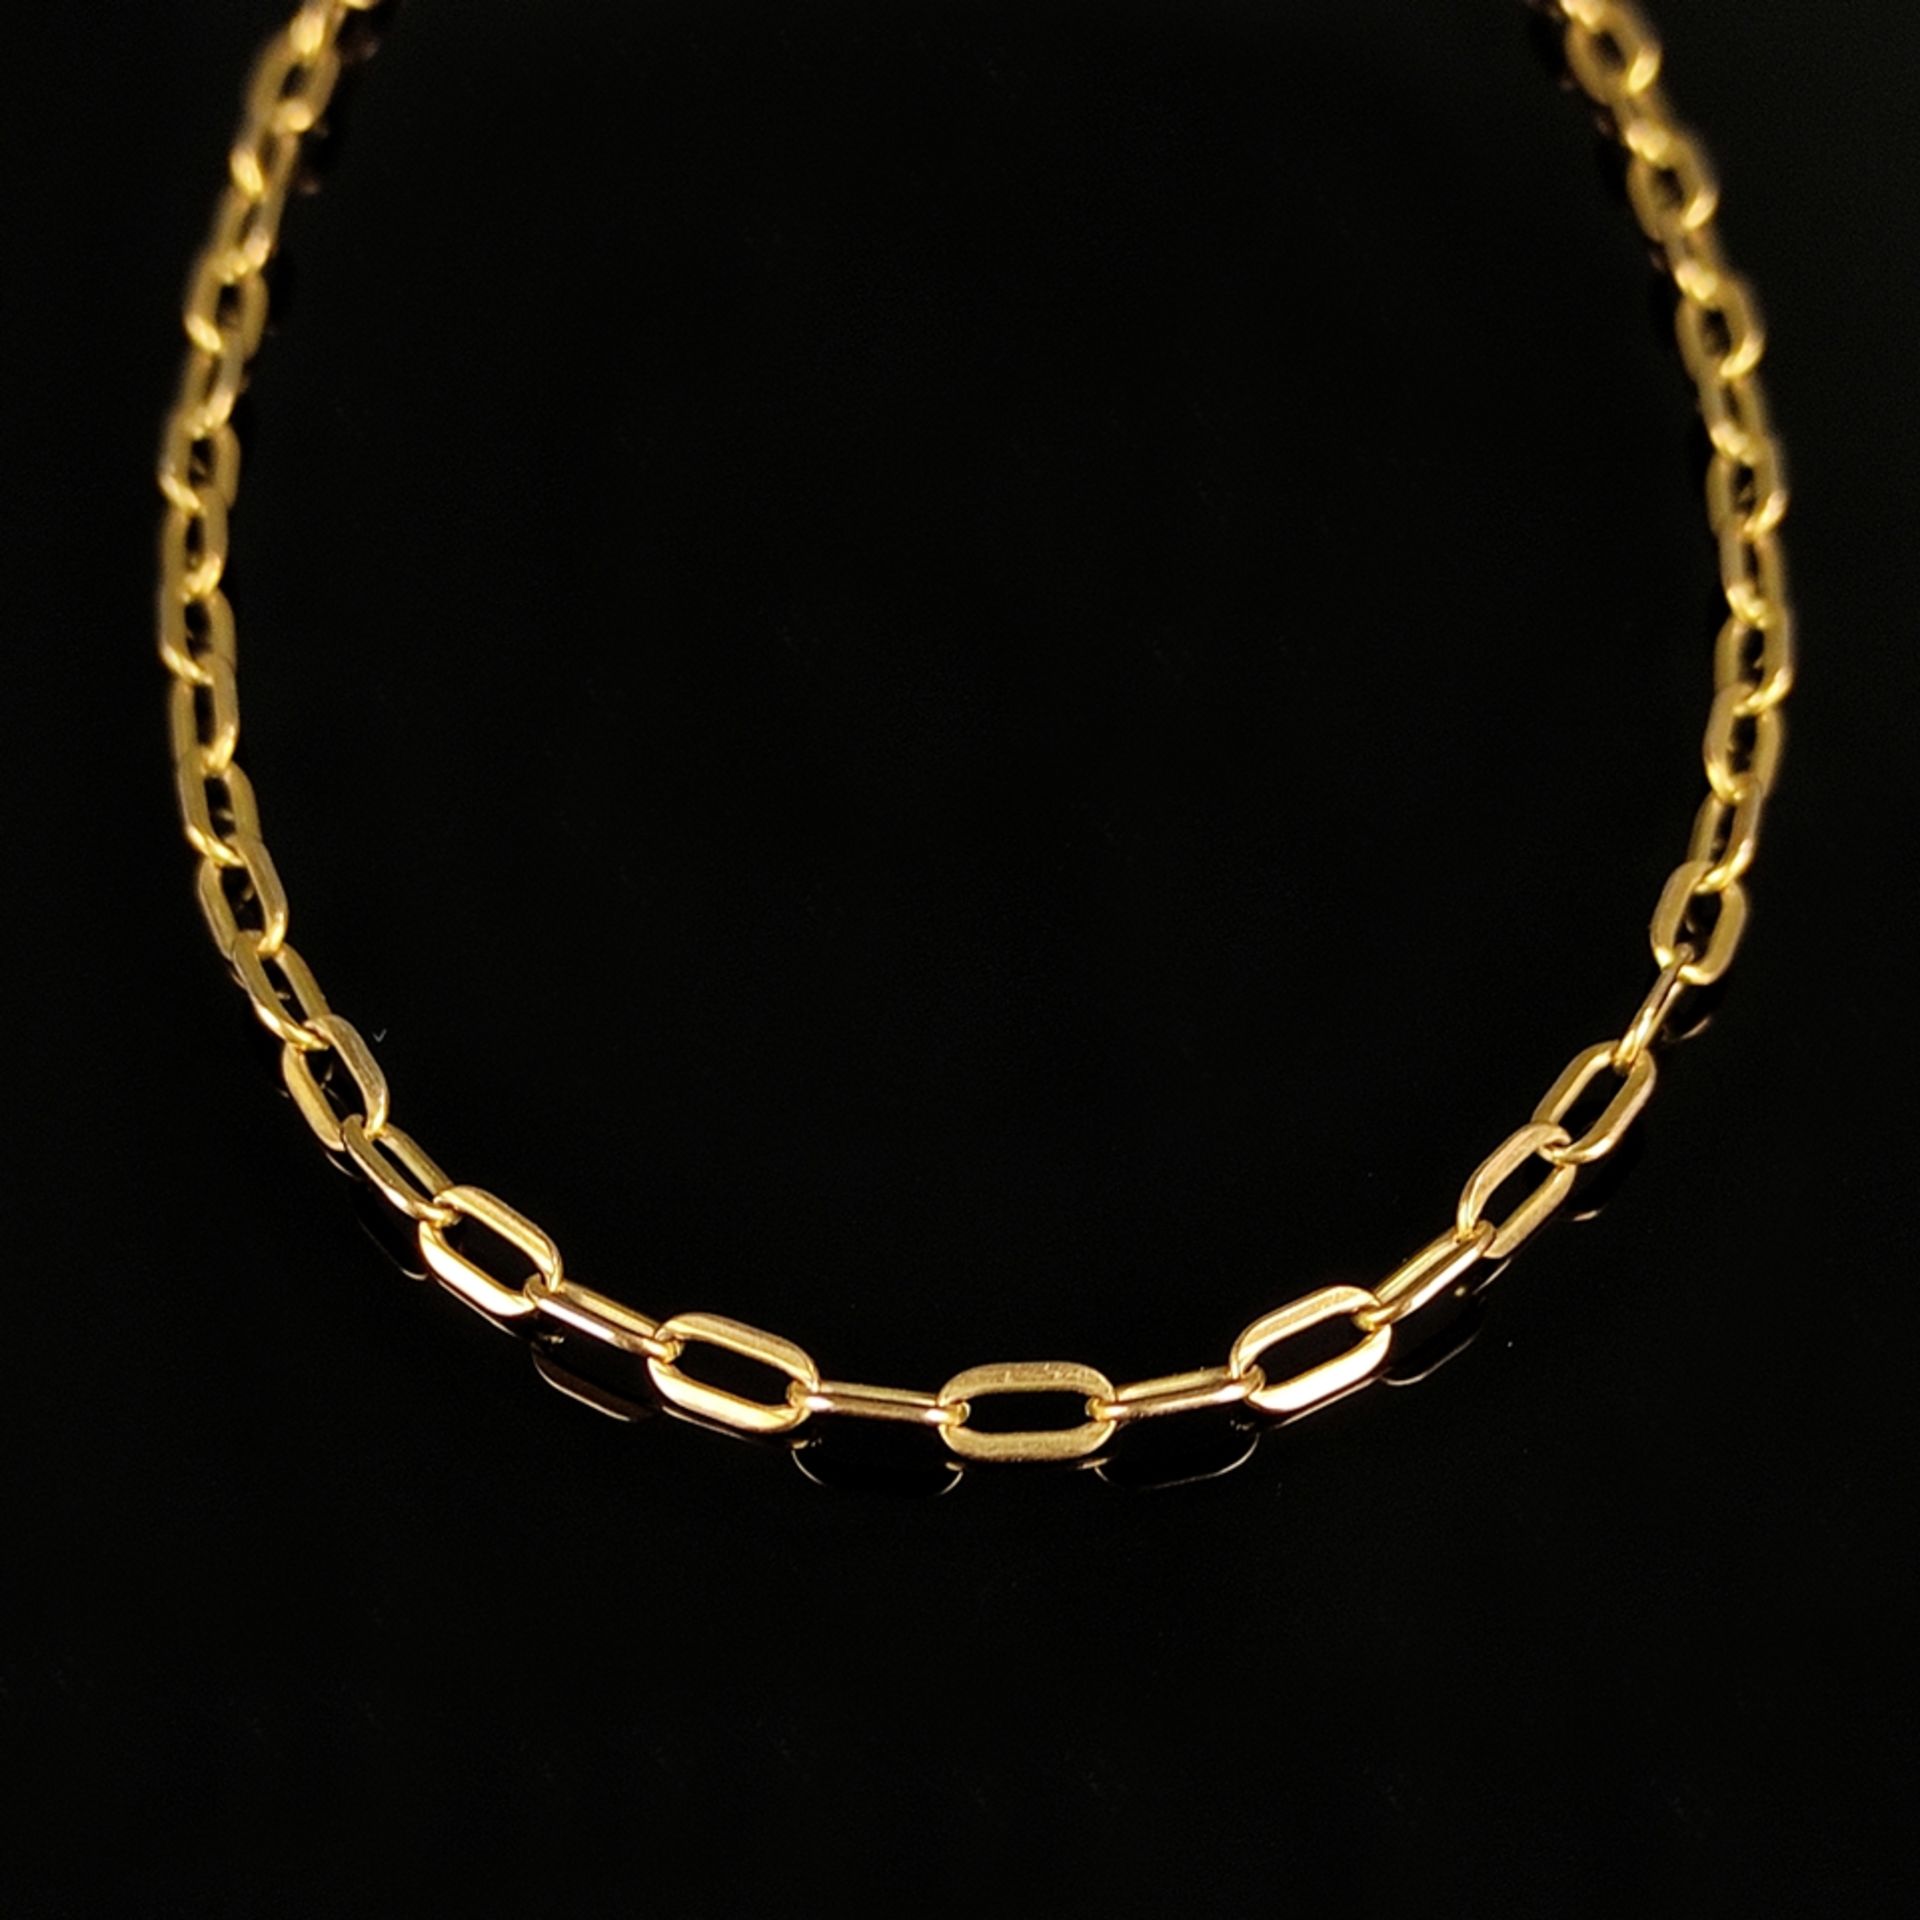 Anchor chain, 333/8K yellow gold (hallmarked), 7g, large oval links, ring clasp, length 55cm, ring 